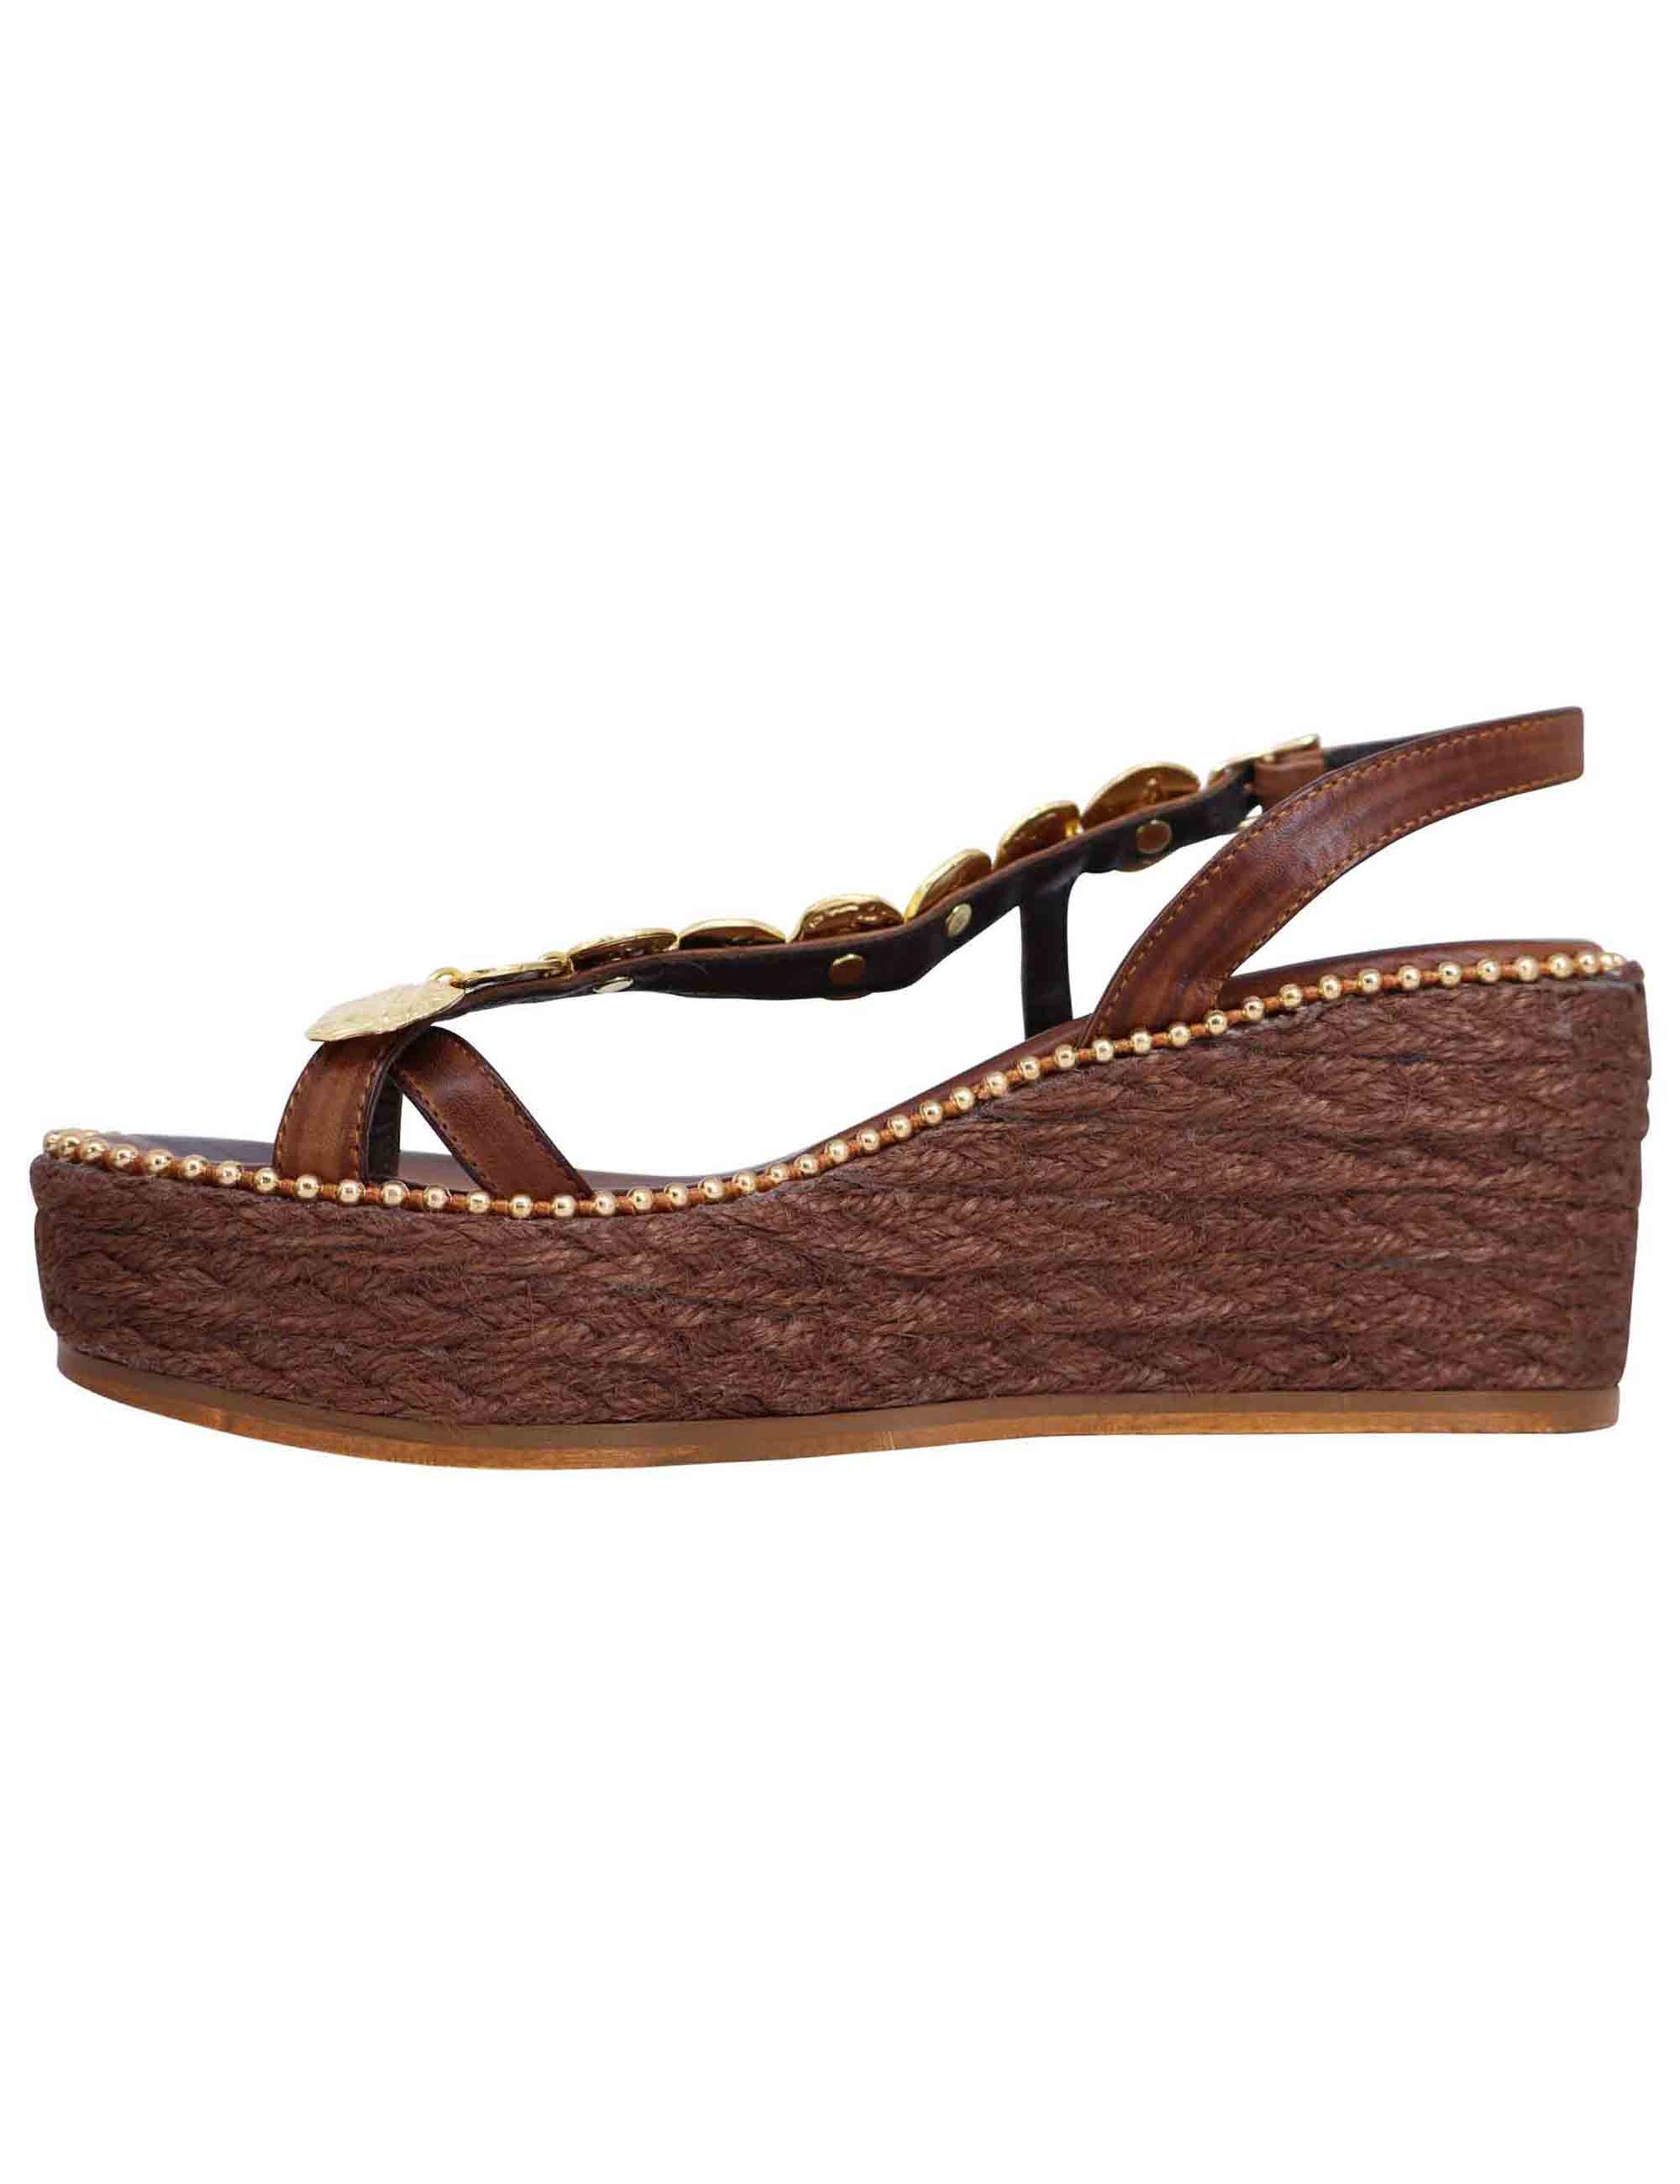 Women's flip-flop sandals in dark brown leather with gold accessories and rope wedge